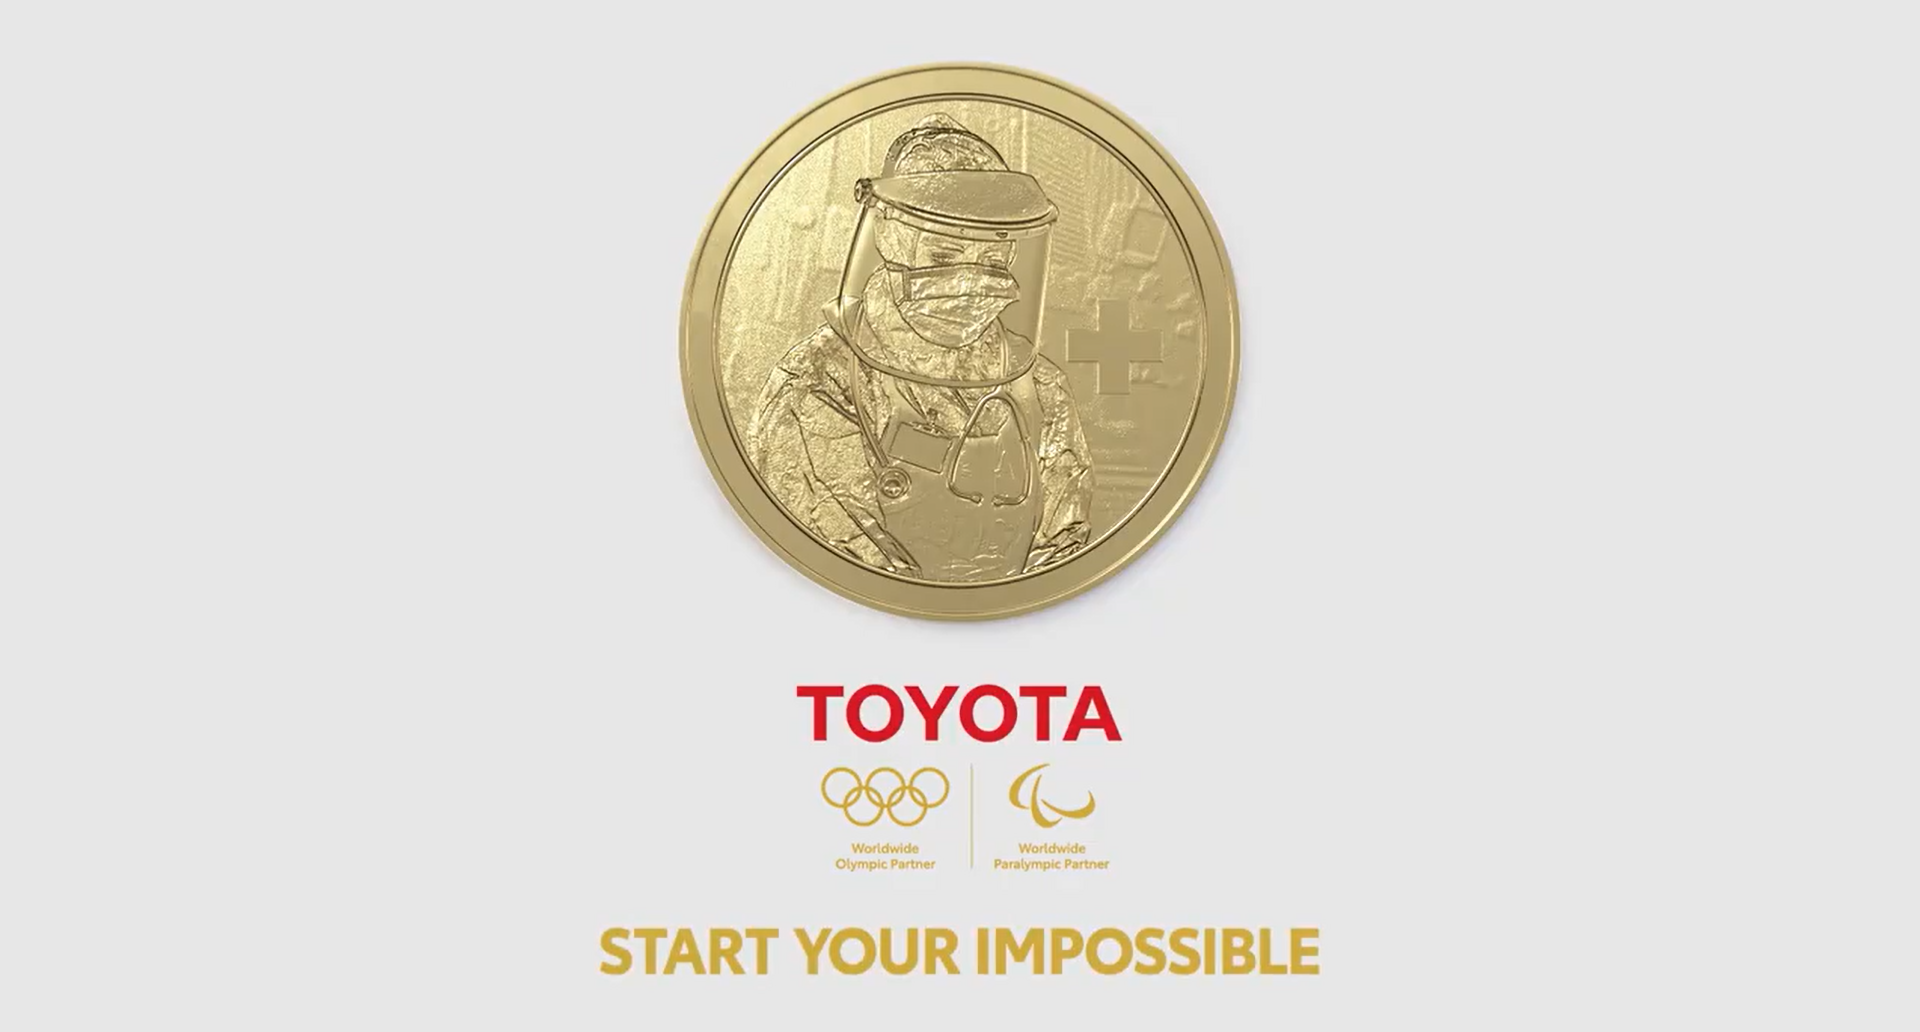 Toyota have launched a "Heroic Medal" advert ©Toyota